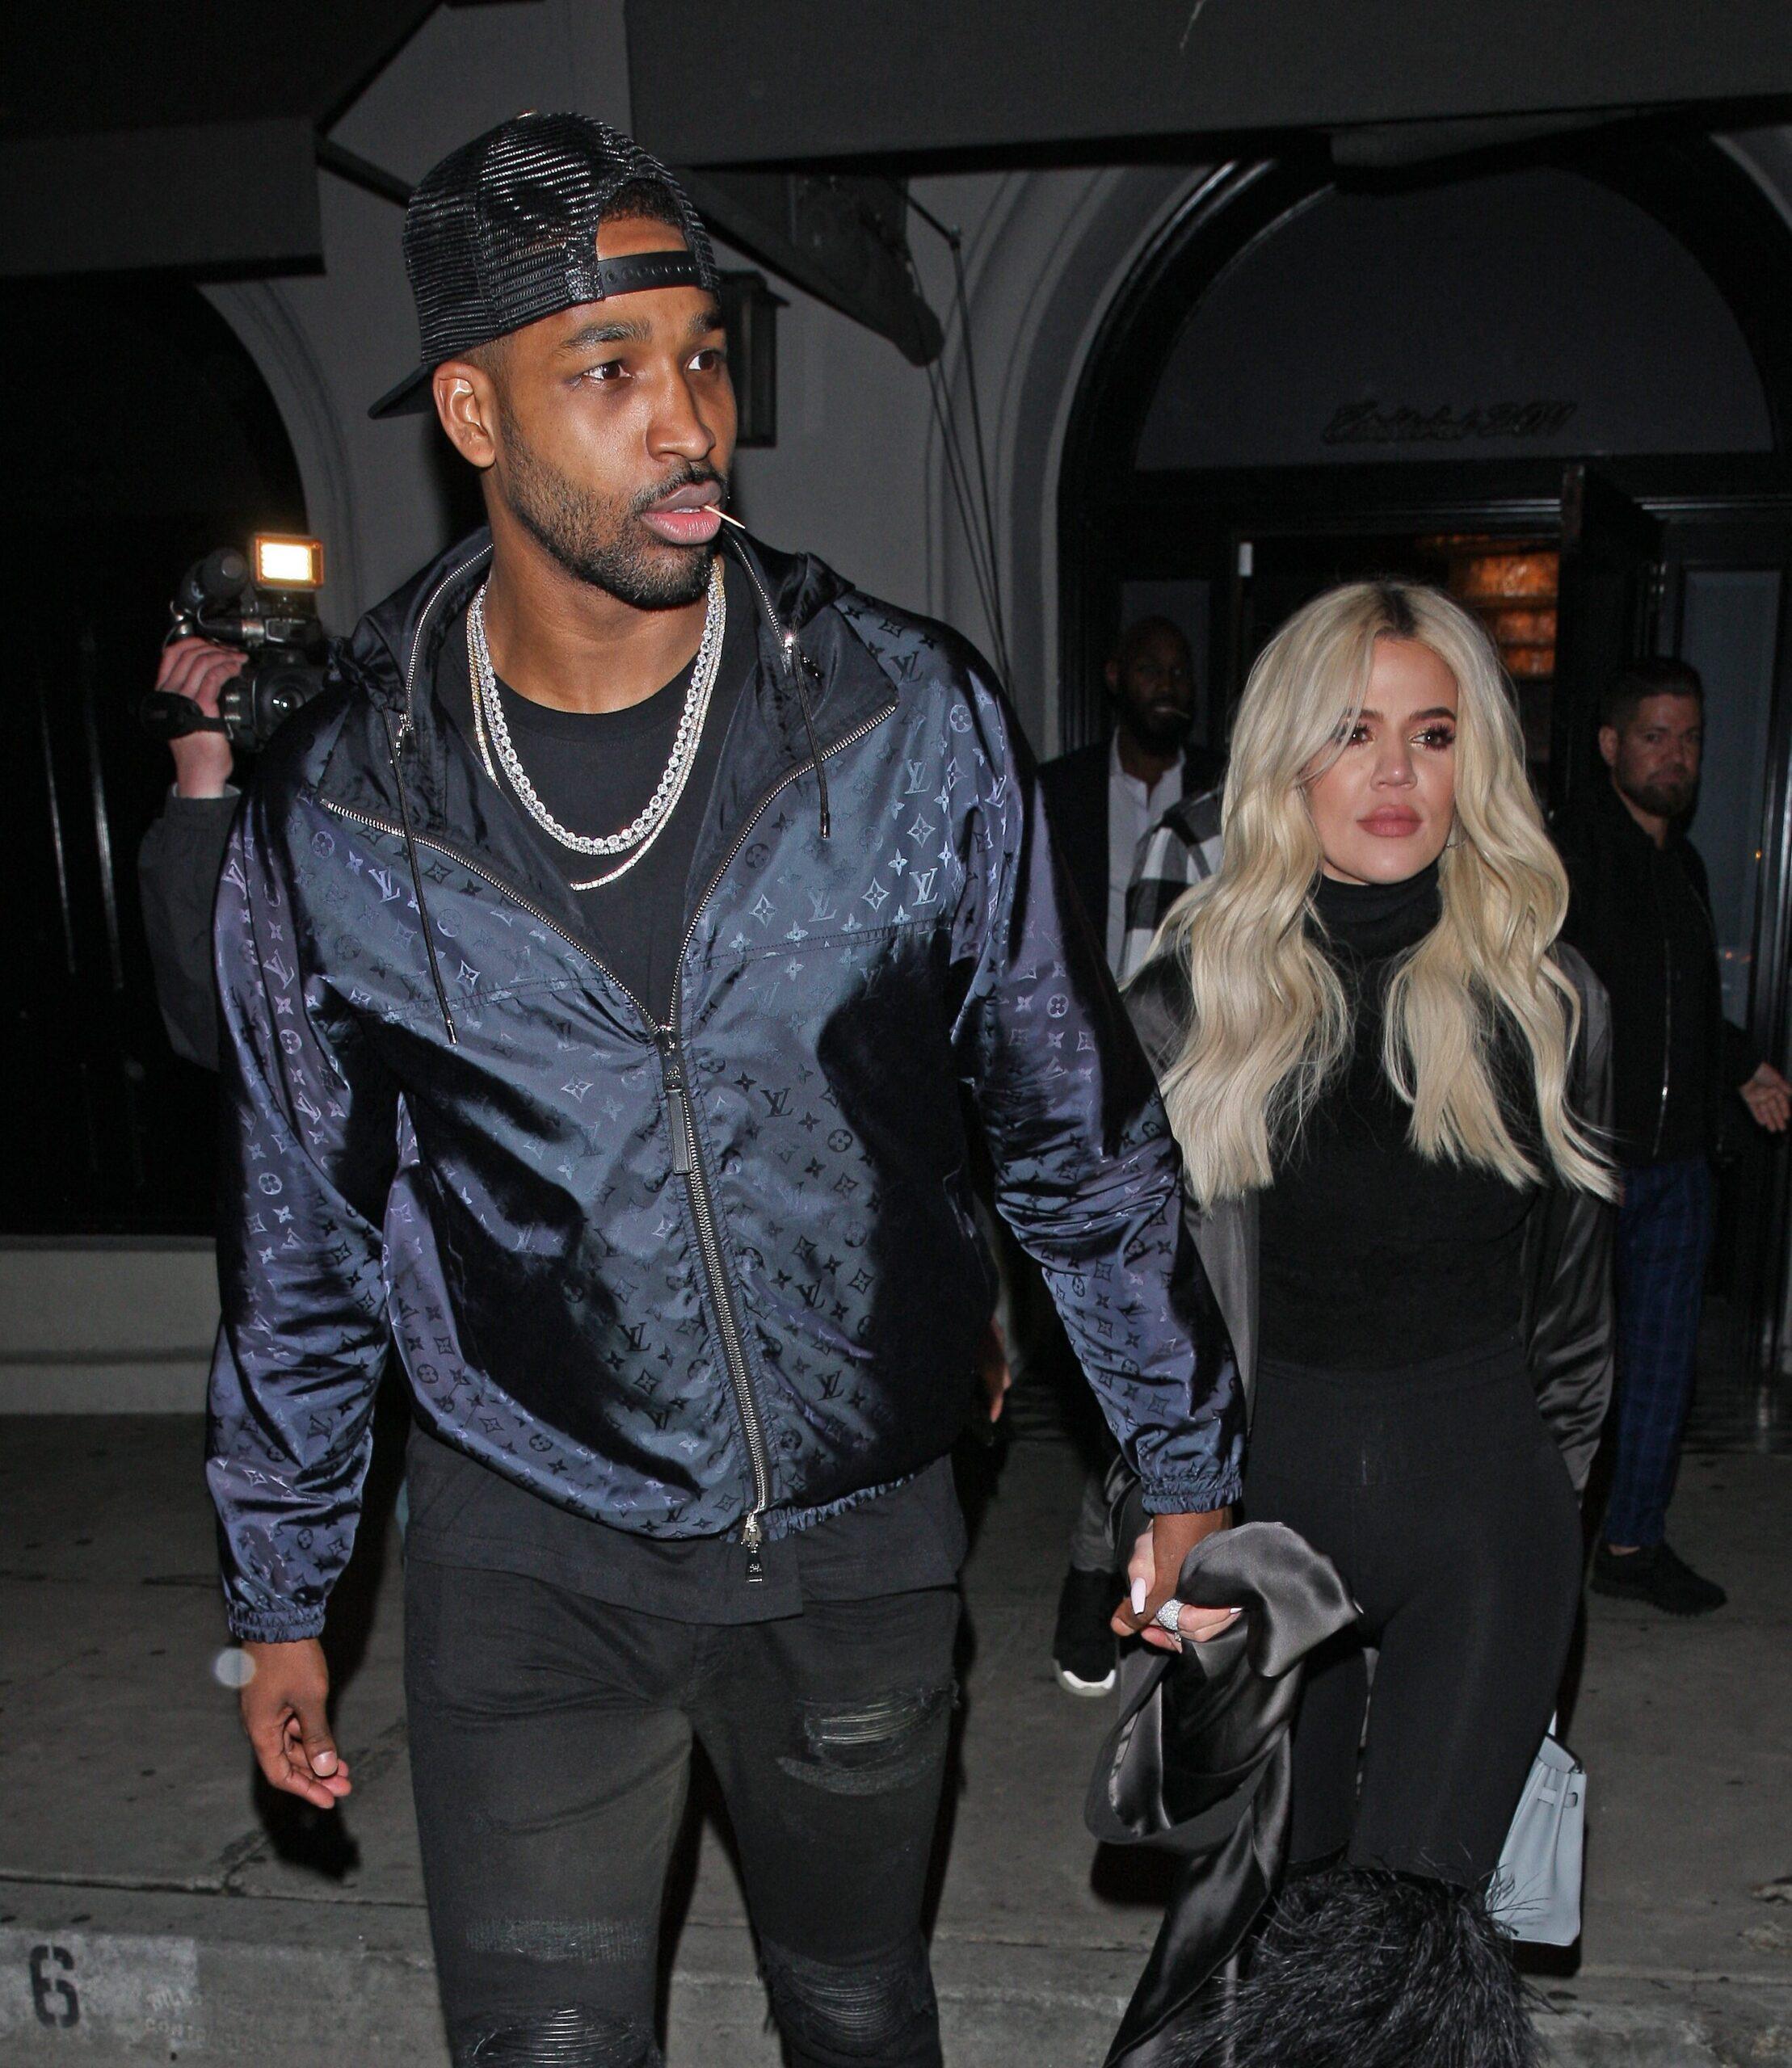 Khloe Kardasian's Ex Tristan Thompson Files For Guardianship Over His Brother